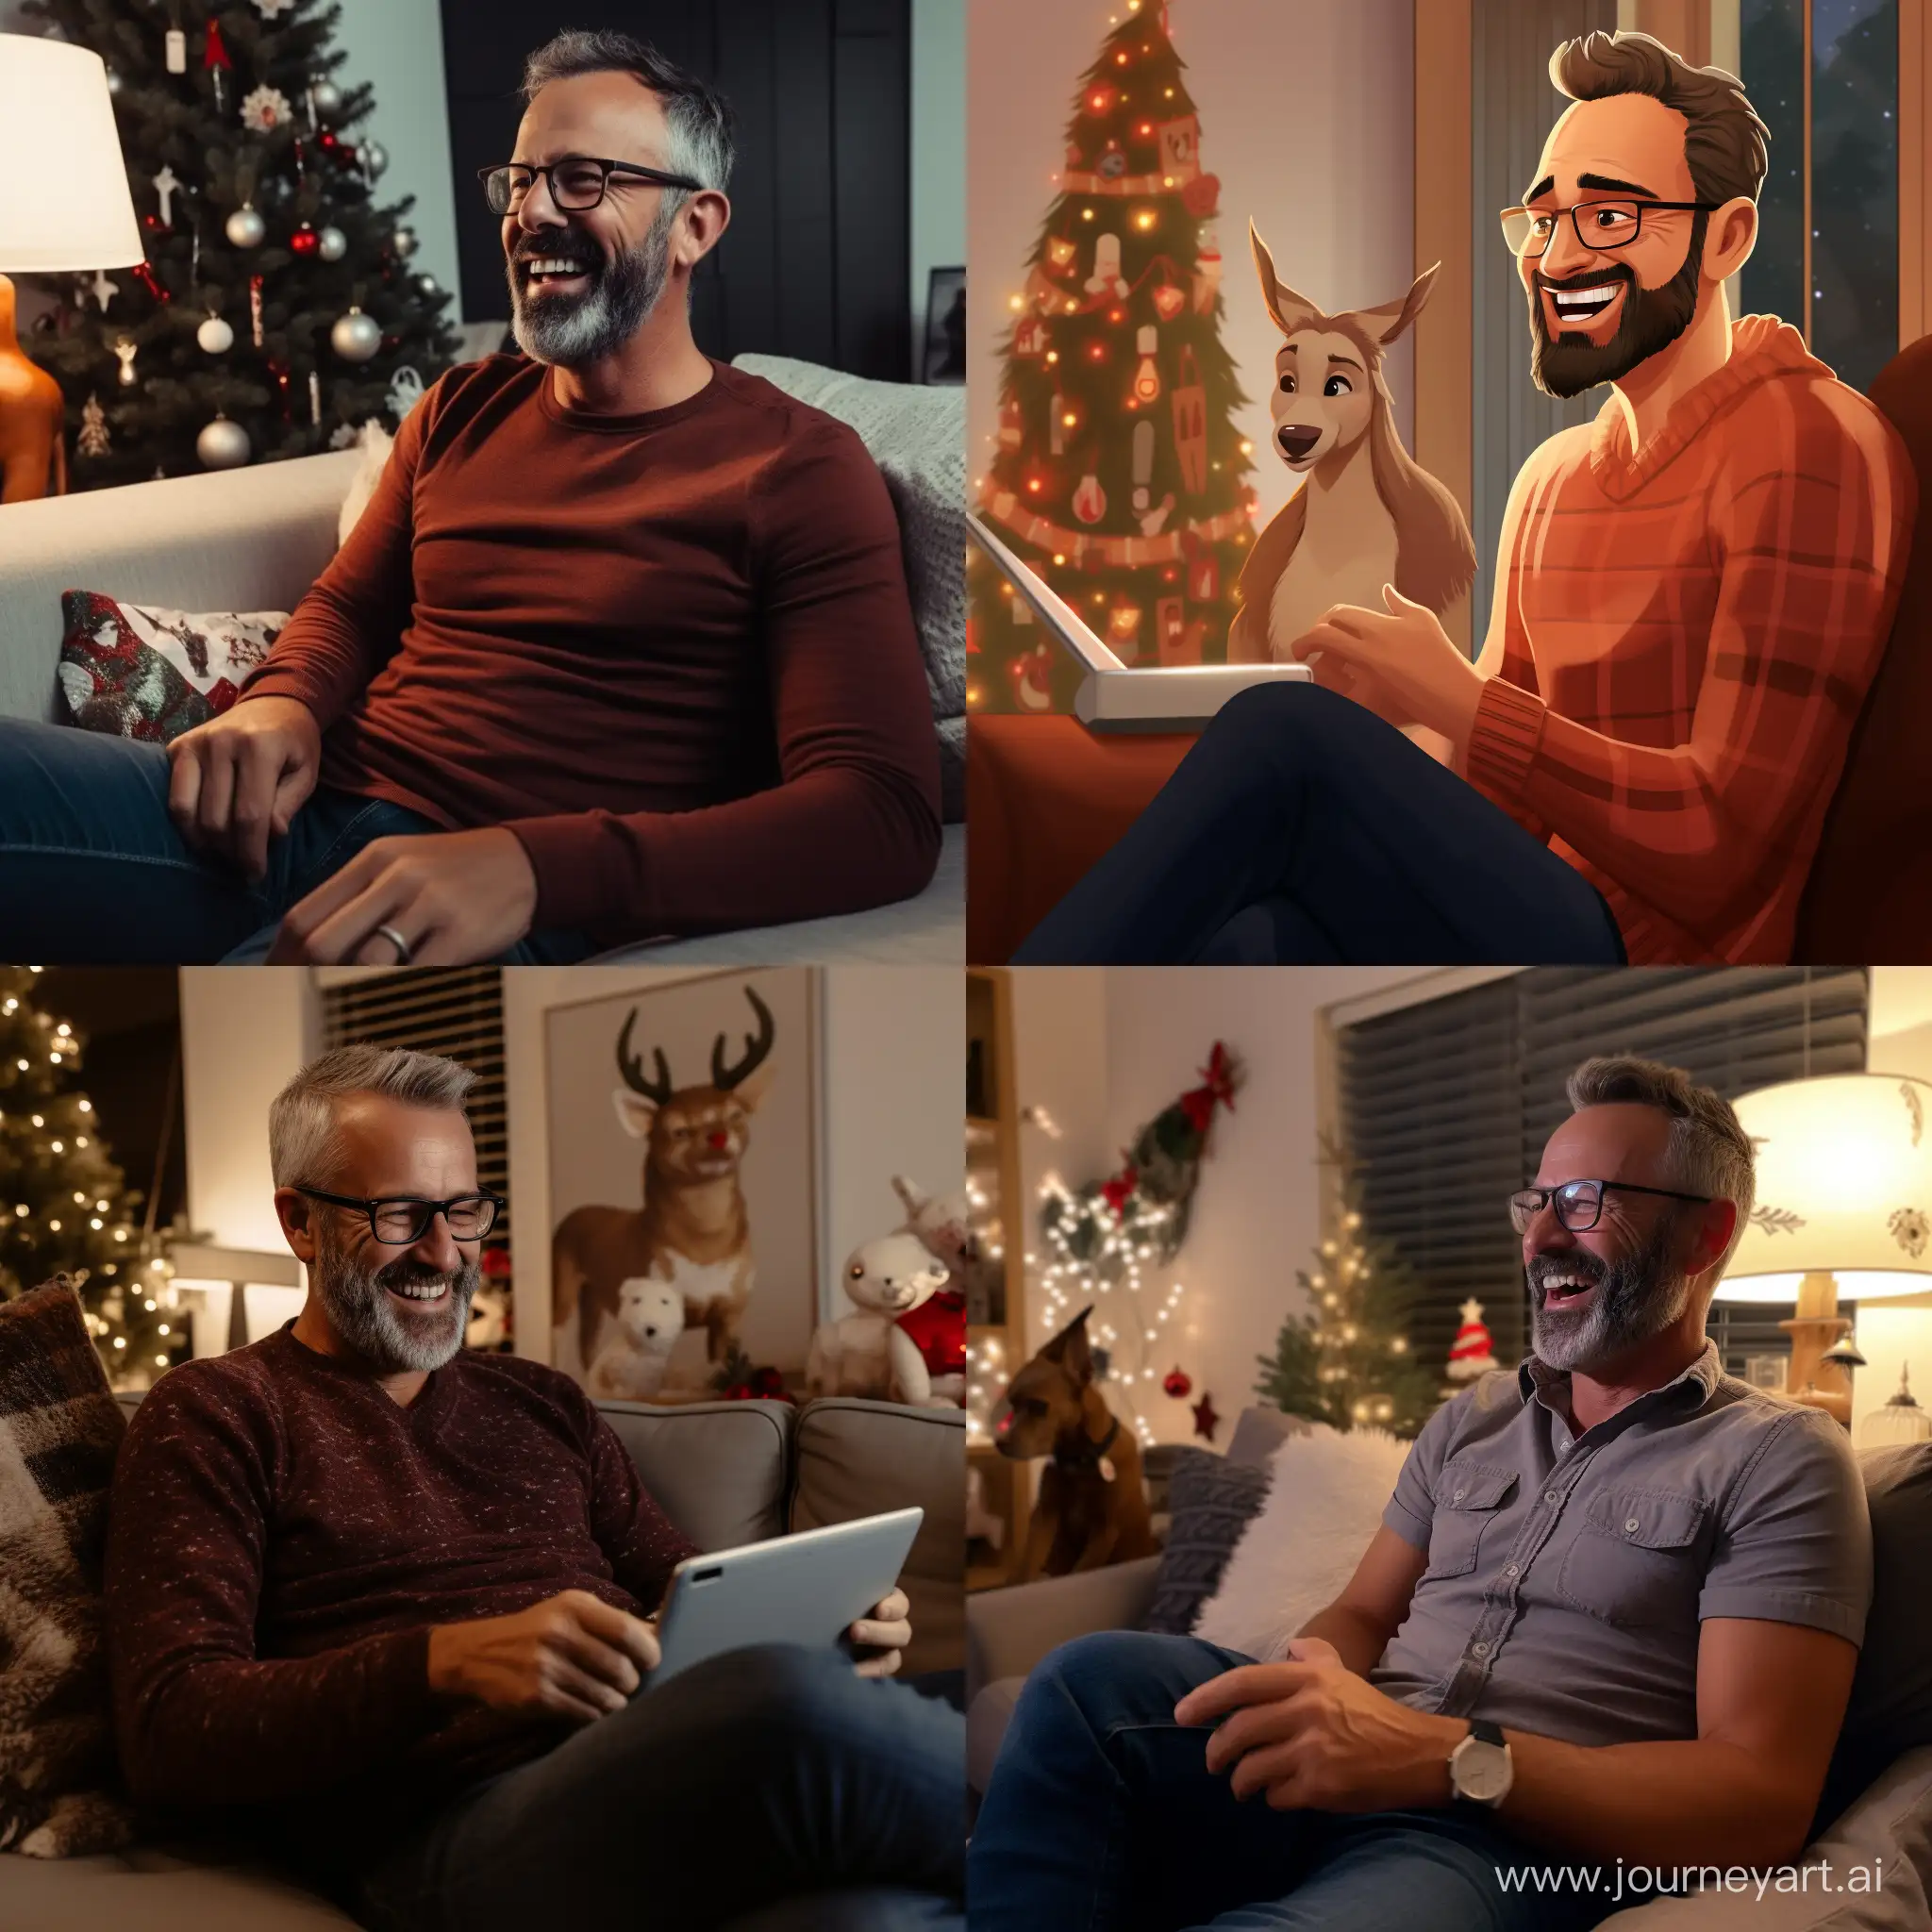 A middle-aged man in jeans and a sweater with reindeer is talking via video link with his wife.  The photo shows a middle-aged man sitting on a sofa in the living room. He is wearing jeans and a sweater with deer on it. The sweater is dark blue with red deer. A man of medium height and build. He has short dark hair and a beard. He smiles and looks relaxed.  He has a phone in his hand, through which he speaks via video link with his wife. The woman on the phone screen is smiling and also looks happy.  There is a mug of fragrant coffee on the table in front of the man. Steam is coming out of the mug because the coffee is hotter. The inscription on the mug is "Light business trip".  The living room is flooded with warm light coming from a floor lamp and a garland on the Christmas tree. There are paintings of winter landscapes on the walls. There is a soft carpet on the floor, on which pillows are scattered.  Outside the window there is a view of the snow-covered city. The red lights of the cars are slightly blurred, creating a feeling of comfort and tranquility. A man enjoys the warmth and comfort of his apartment, despite the cold winter outside the window